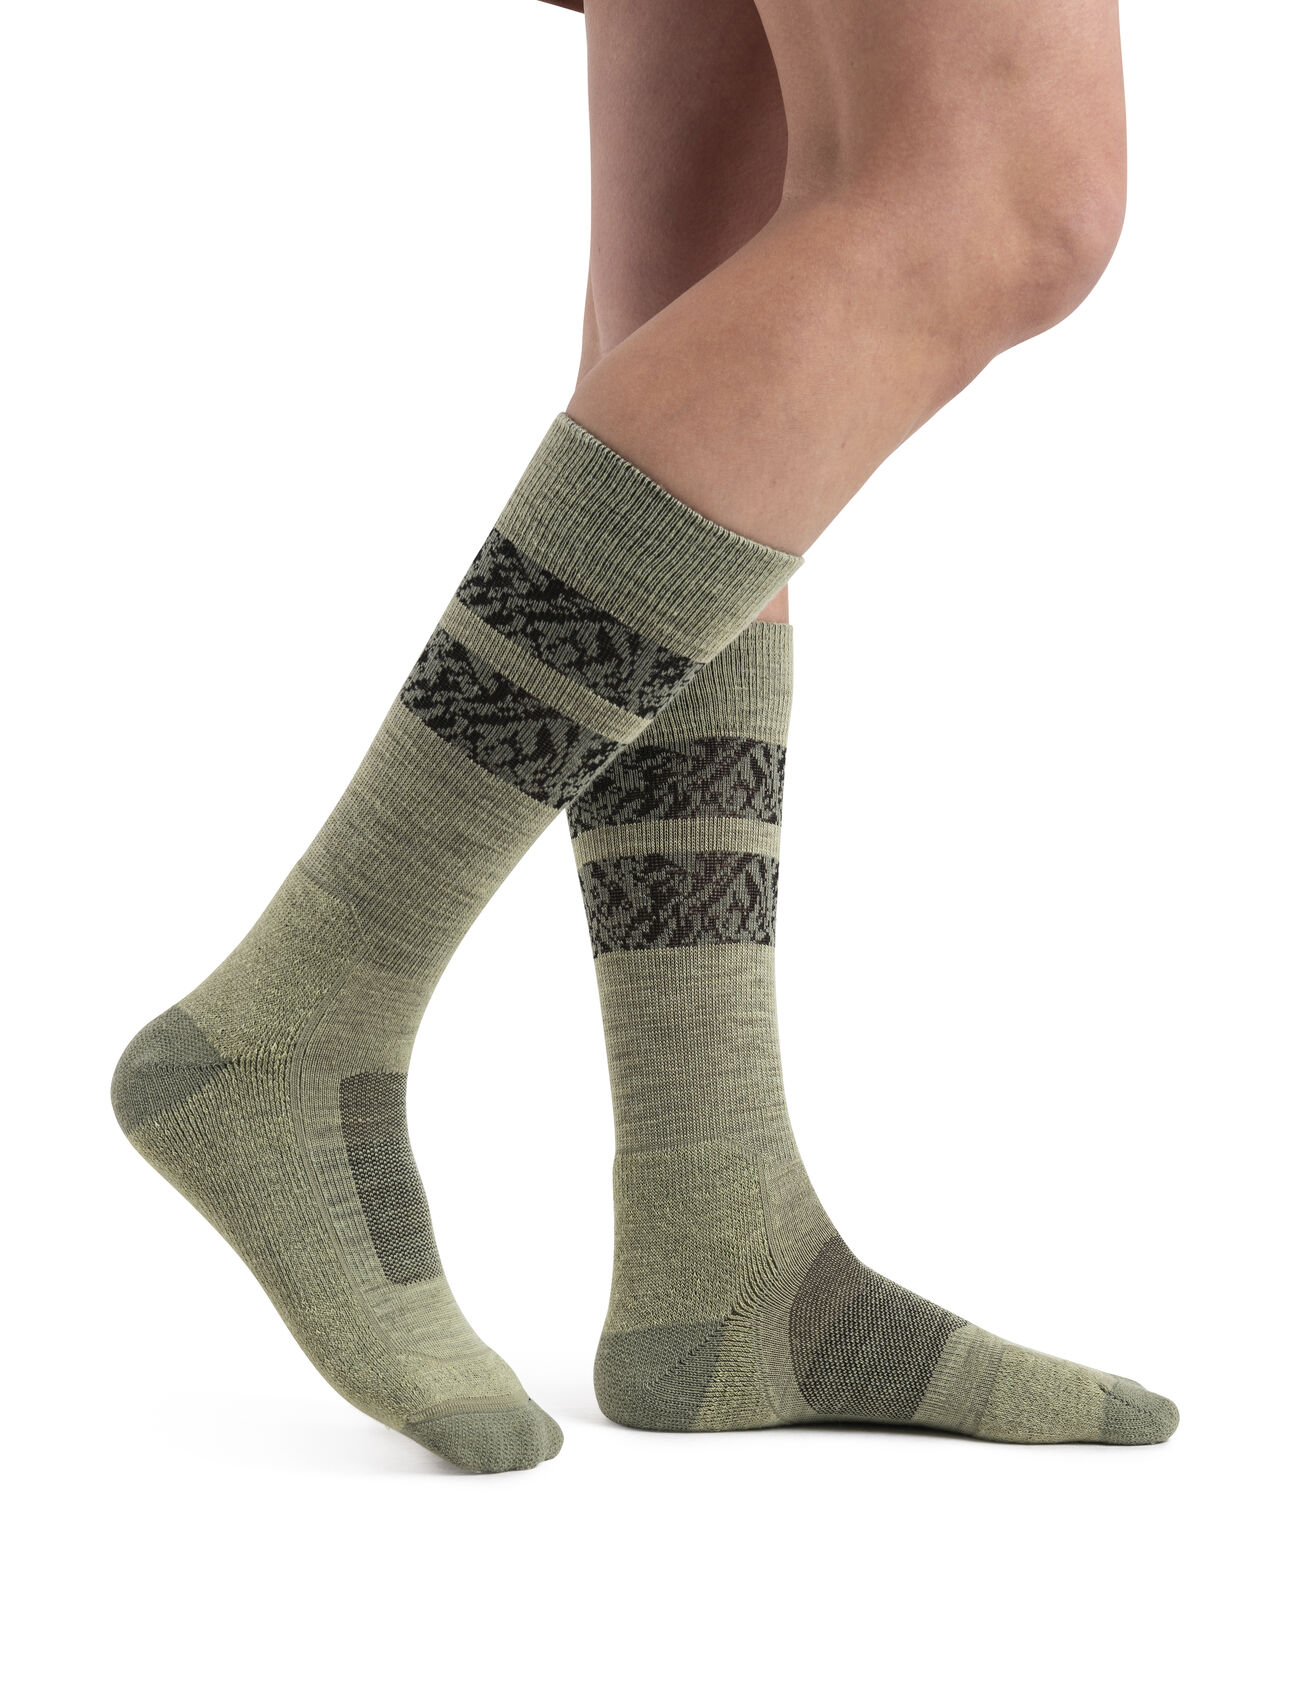 Womens Merino Hike+ Light Crew Natural Summit Socks Durable, crew-length merino socks that are stretchy and naturally odor-resistant with light cushion, the Hike+ Light Crew Natural Summit socks feature an anatomical sculpted design for added support on day hikes and backpacking  trips.